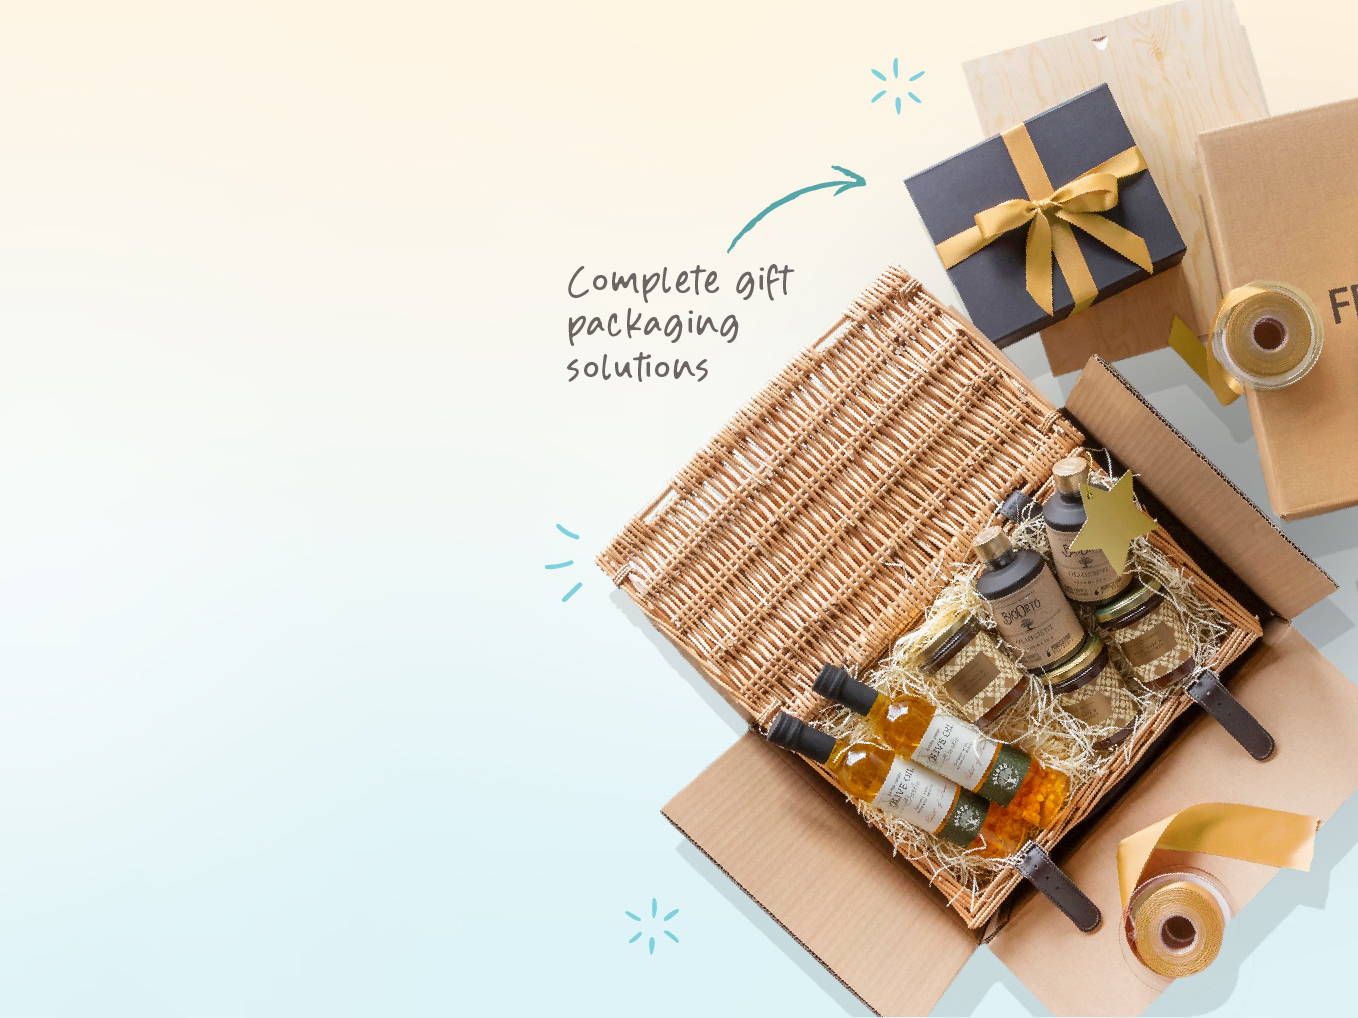 All about gifting - a hamper with products in, two other boxes and a bow tied box with the text Complete git packaging solutions